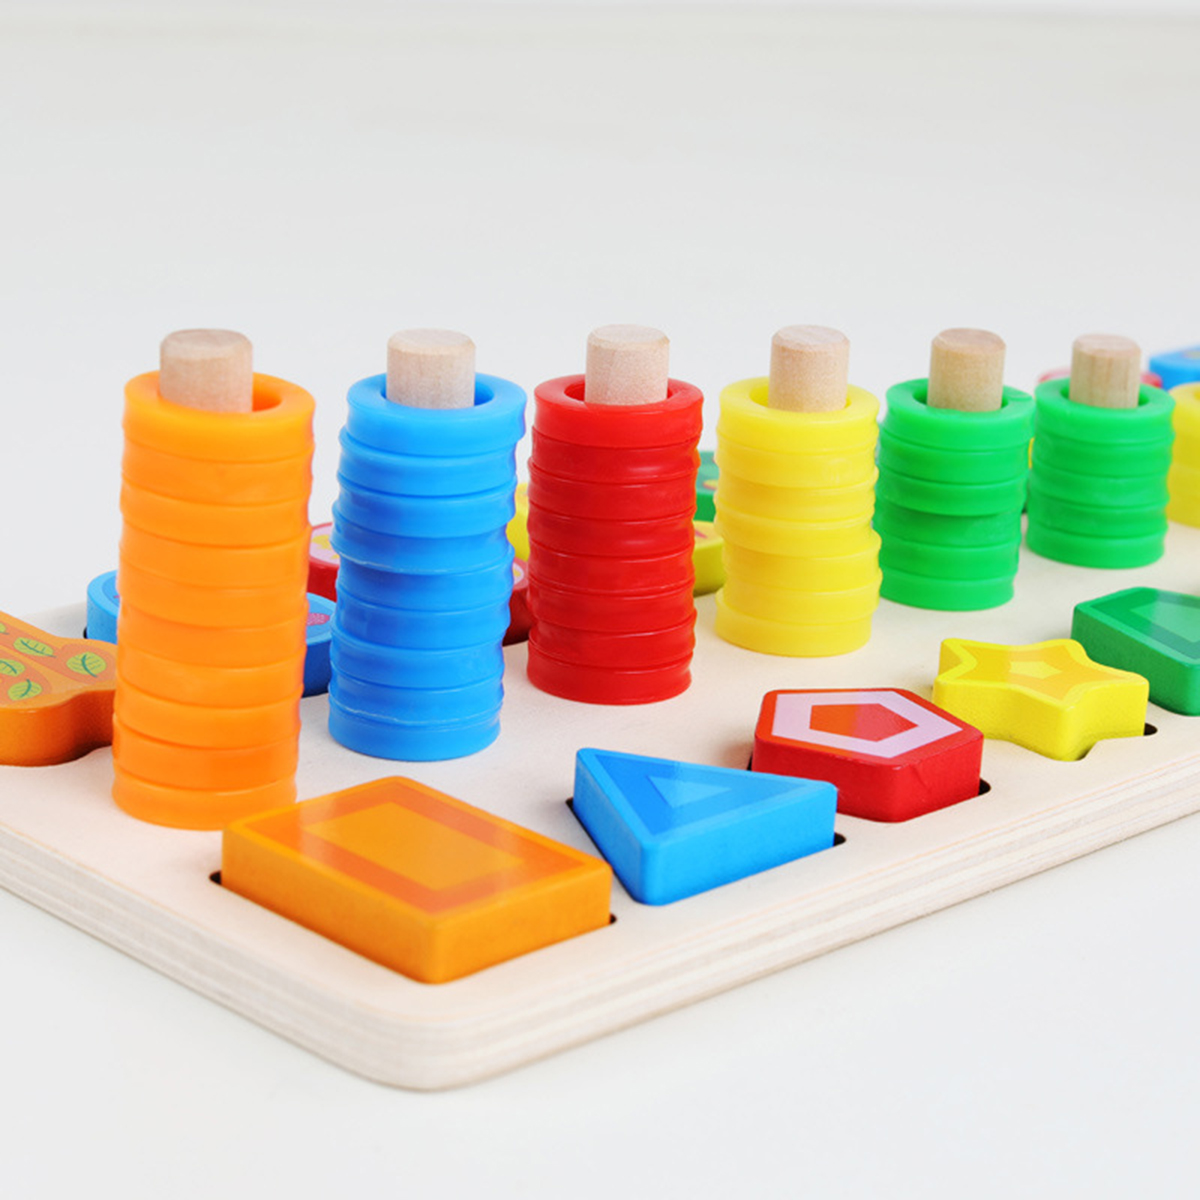 Children-Kids-Wooden-Learning-Digital-Matching-Early-Education-Teaching-Math-Toys-1434254-3